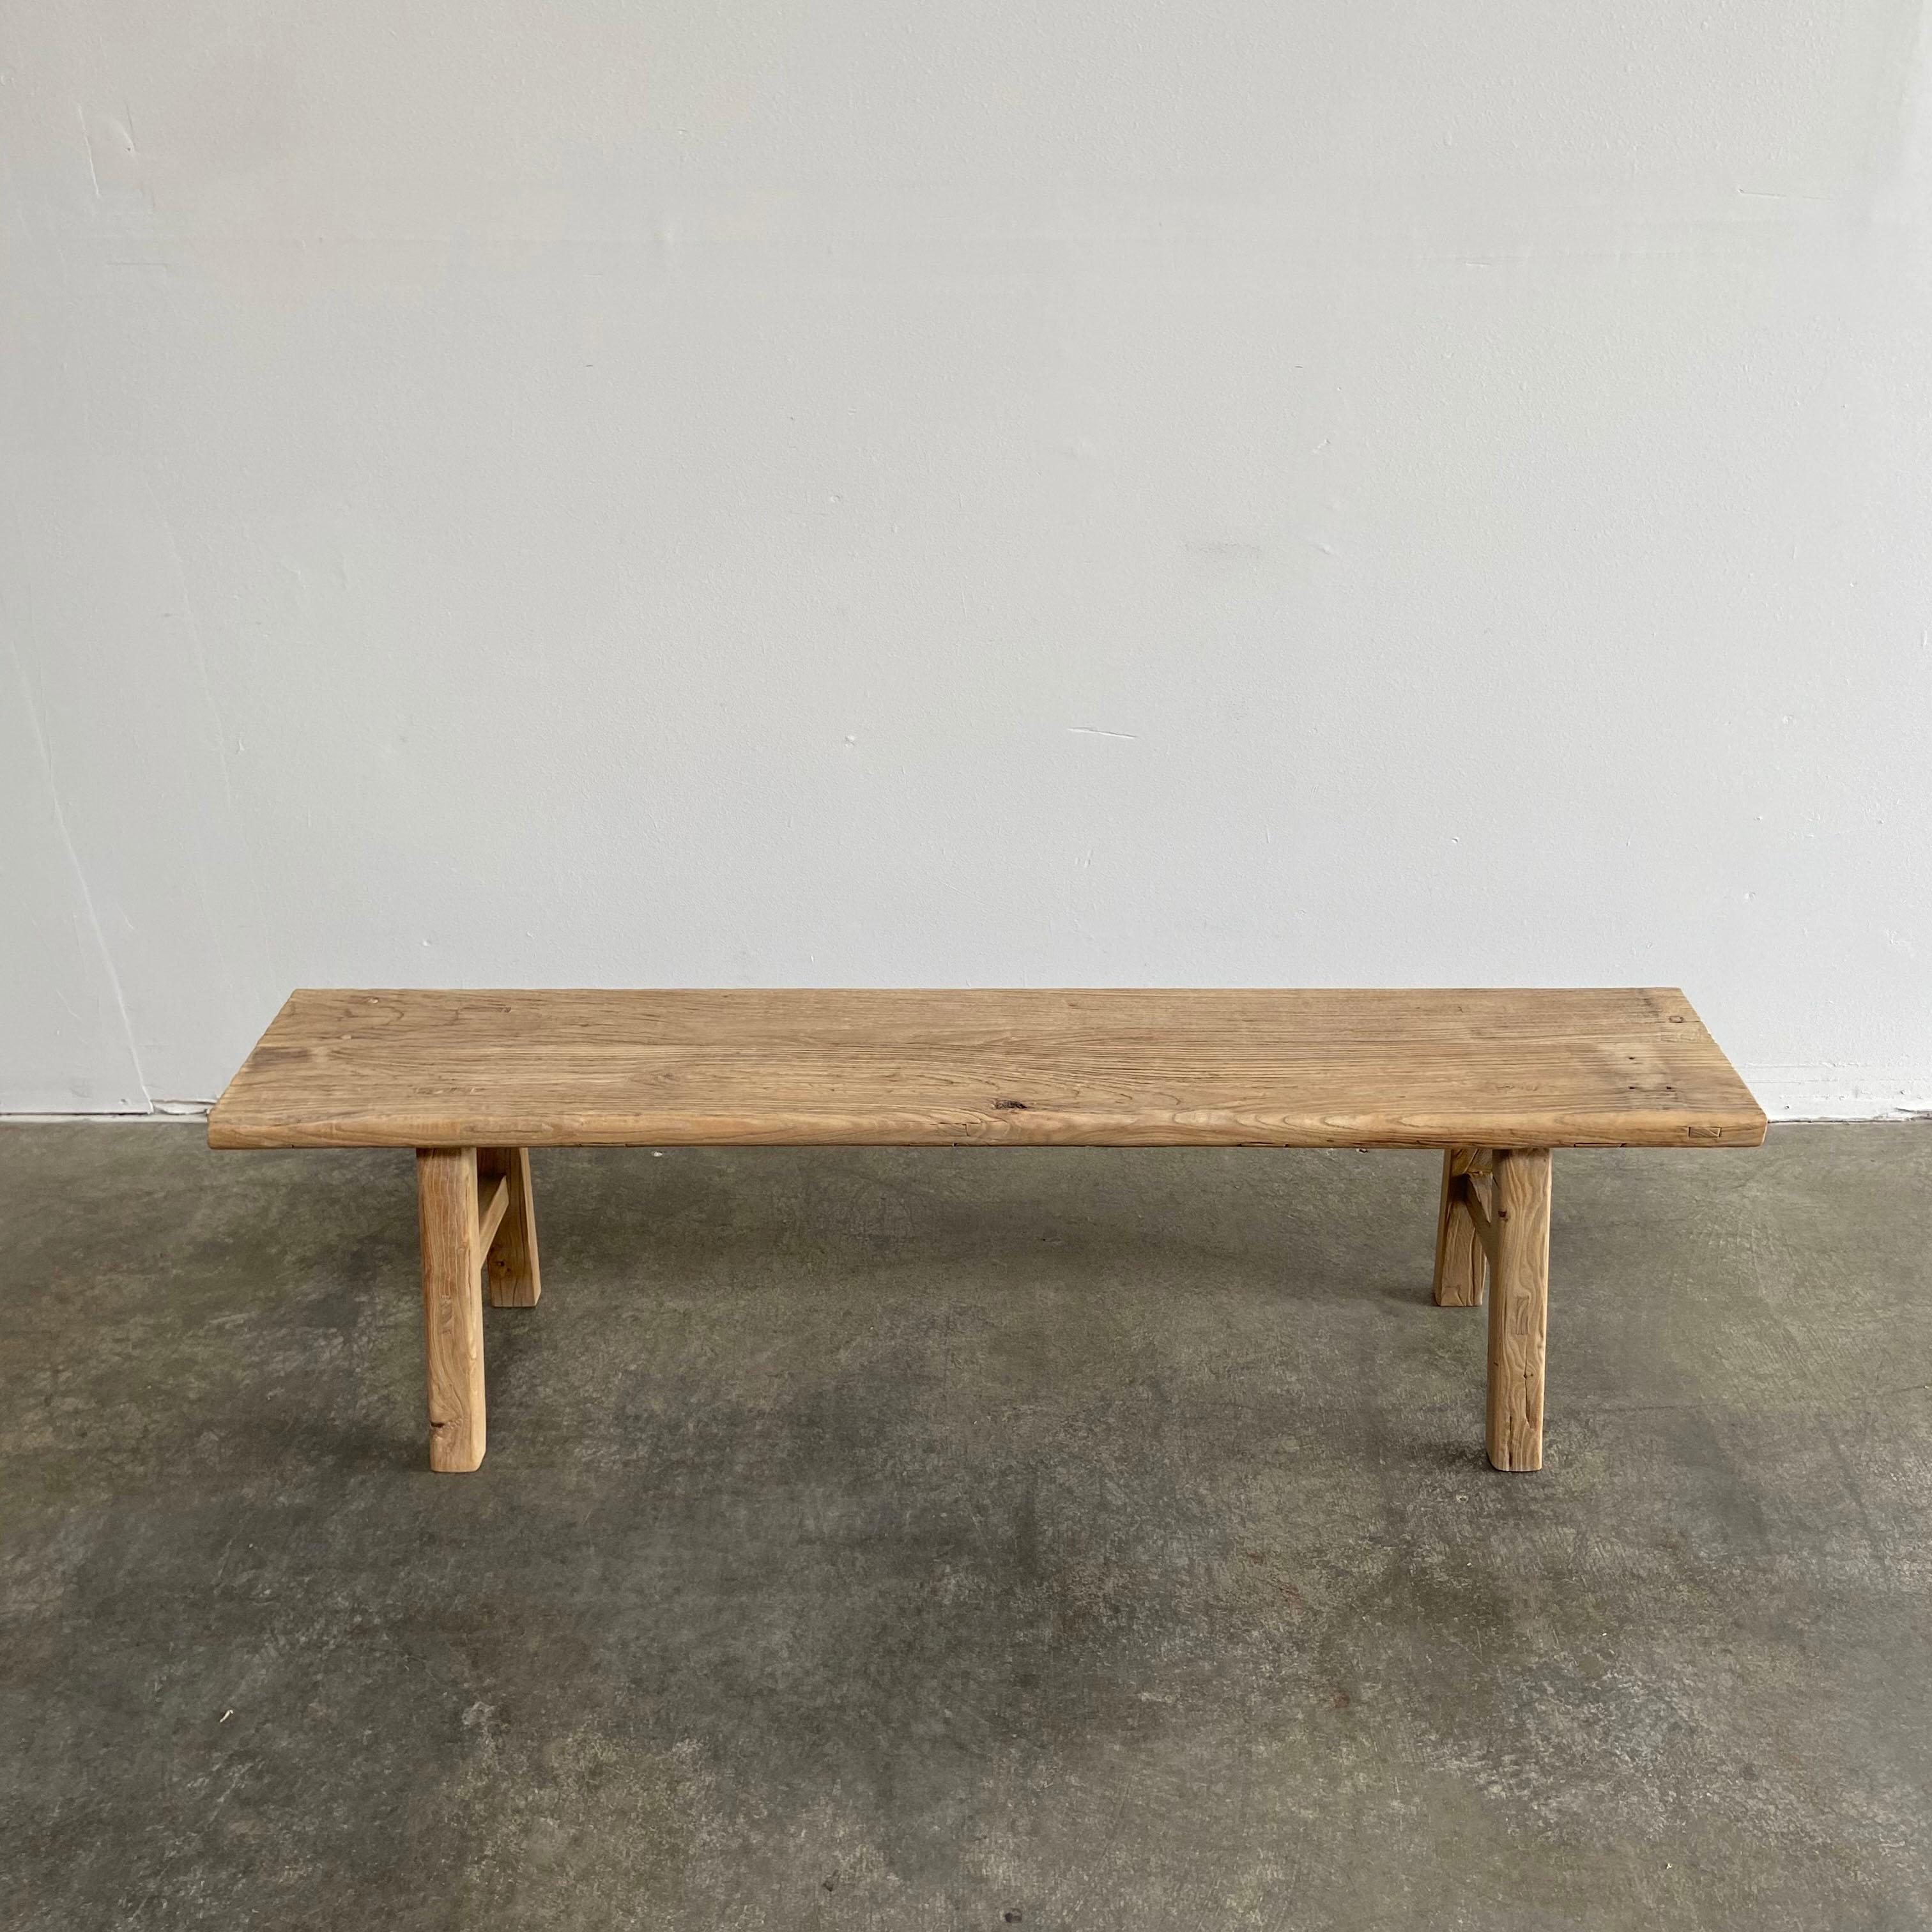 Vintage reclaimed elm wood wide seat bench
Elm wood benches made from vintage reclaimed antique elm wood pieces! Beautiful antique patina, with weathering and age, these are solid and sturdy ready for daily use, use as as a table behind a sofa,